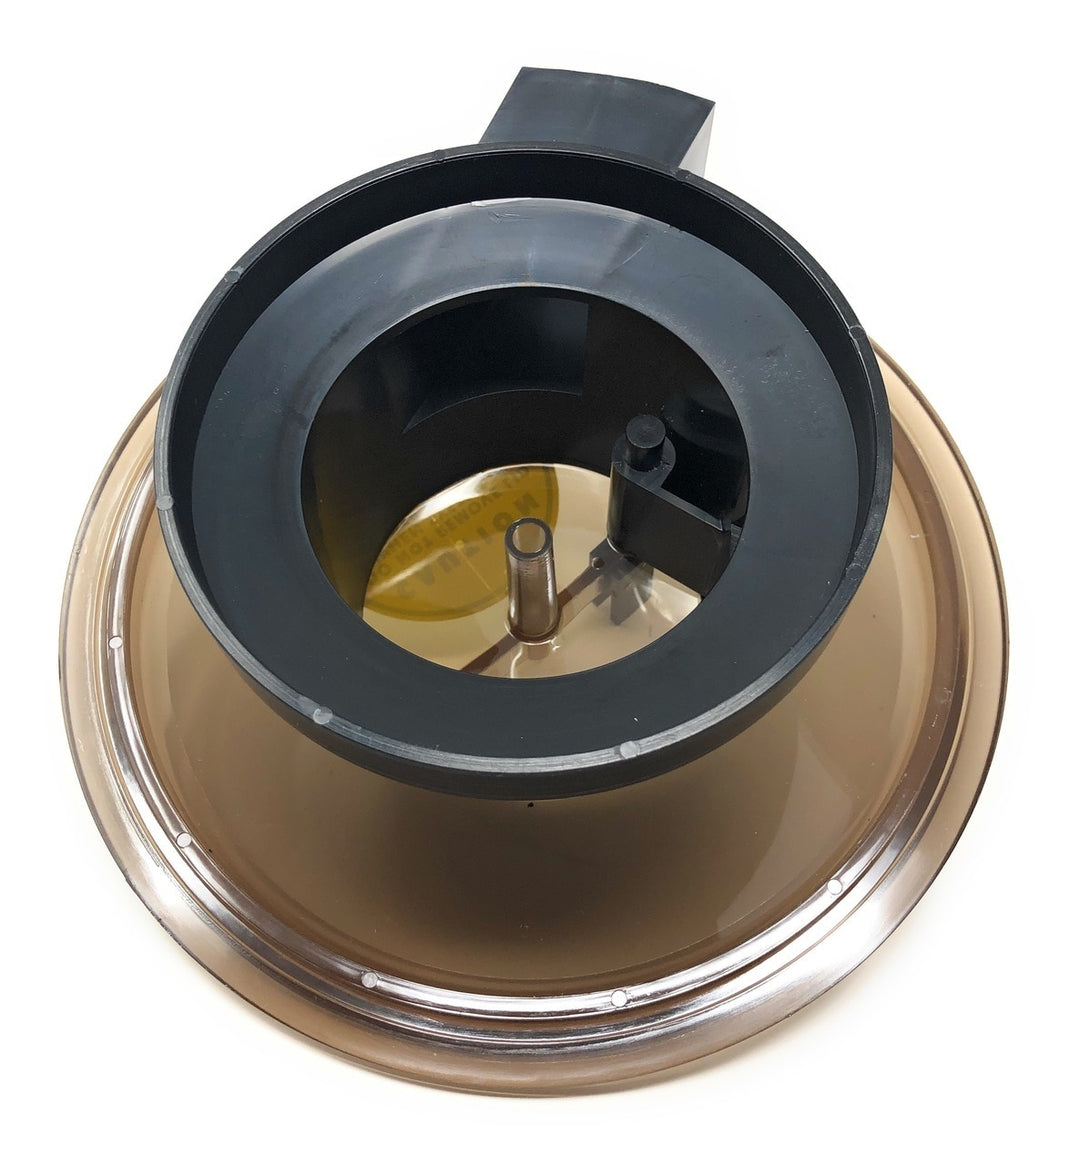 A&A Low Profile T-Valve Lid Assembly - ePoolSupply